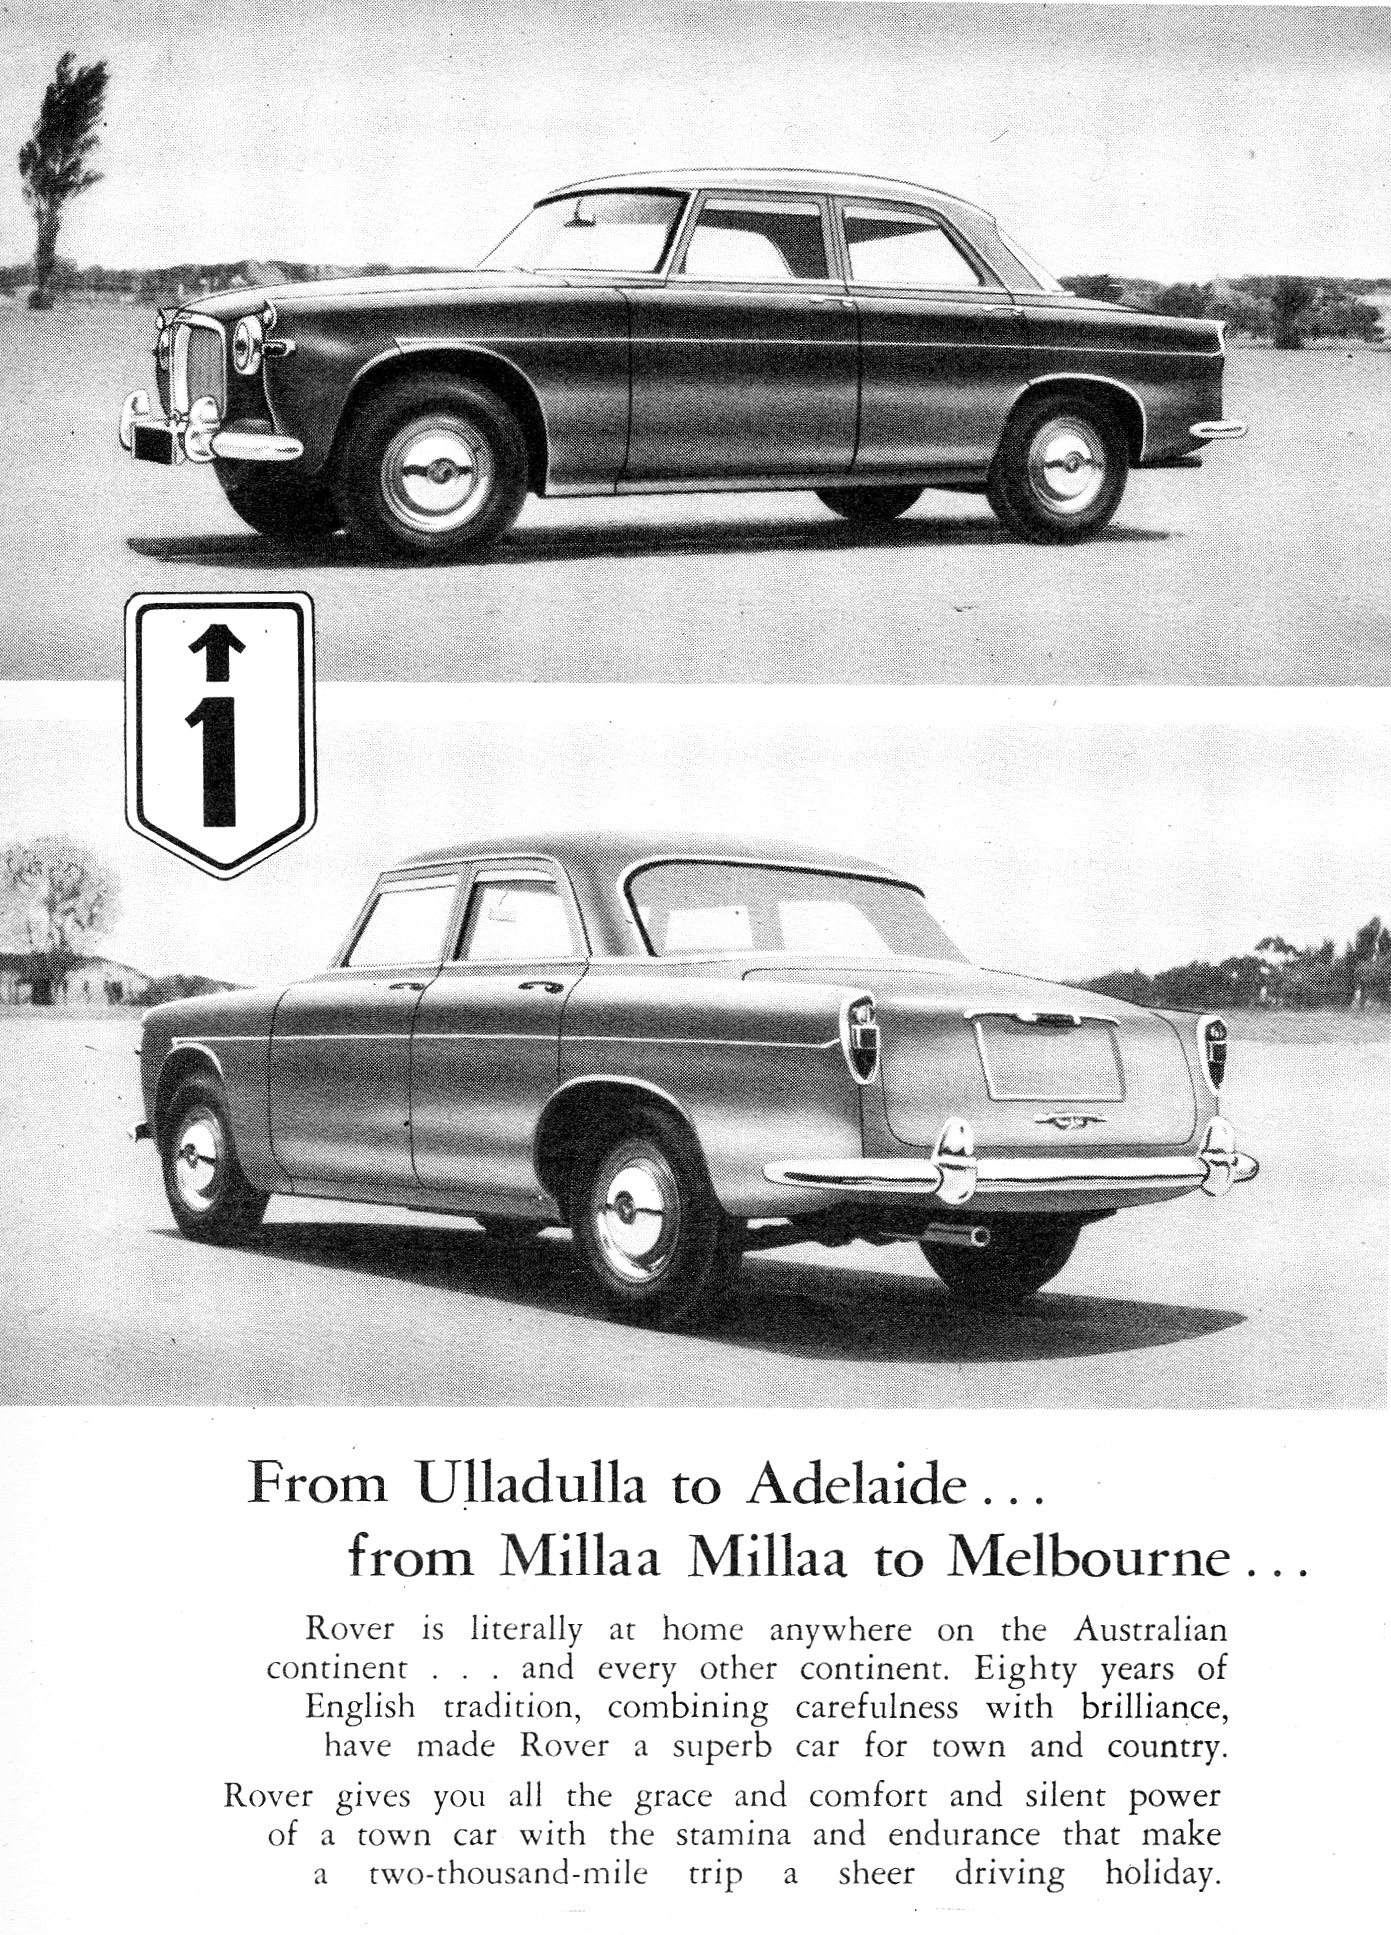 1961 Rover P5 3 Litre 6 Cylinder Mark I Saloon Page 1